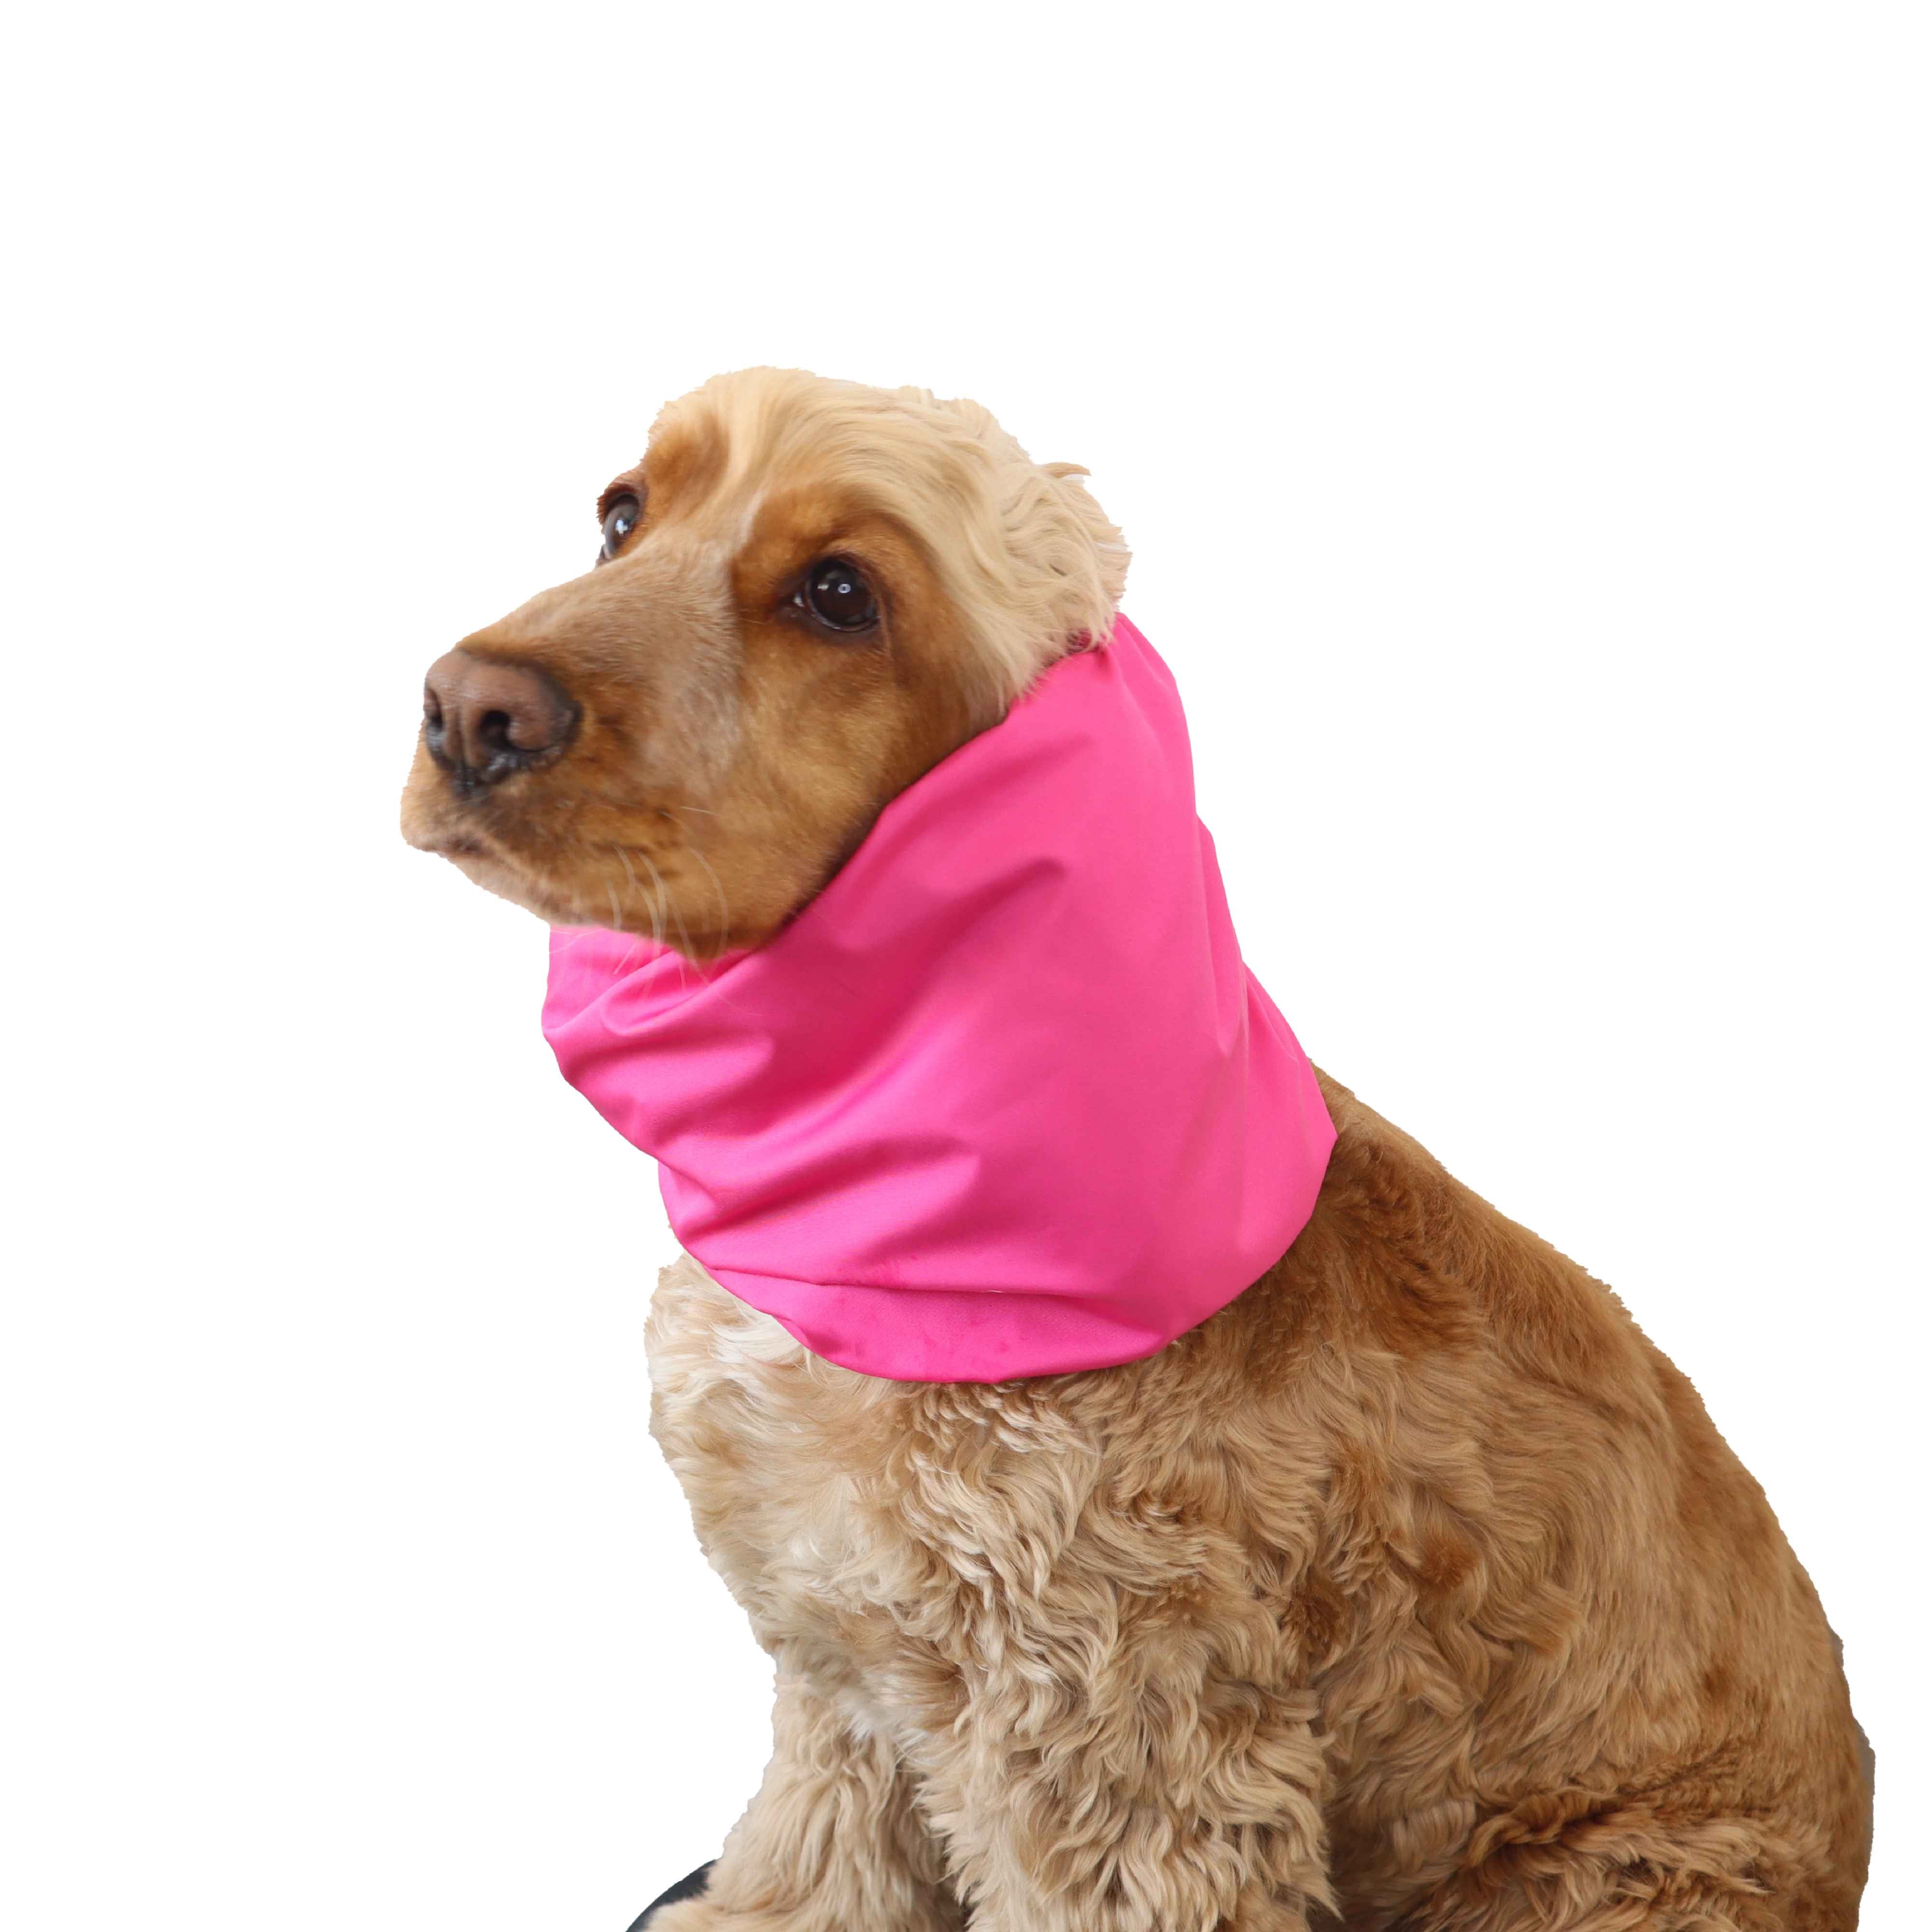 Dog With Snood by Distinguish Me